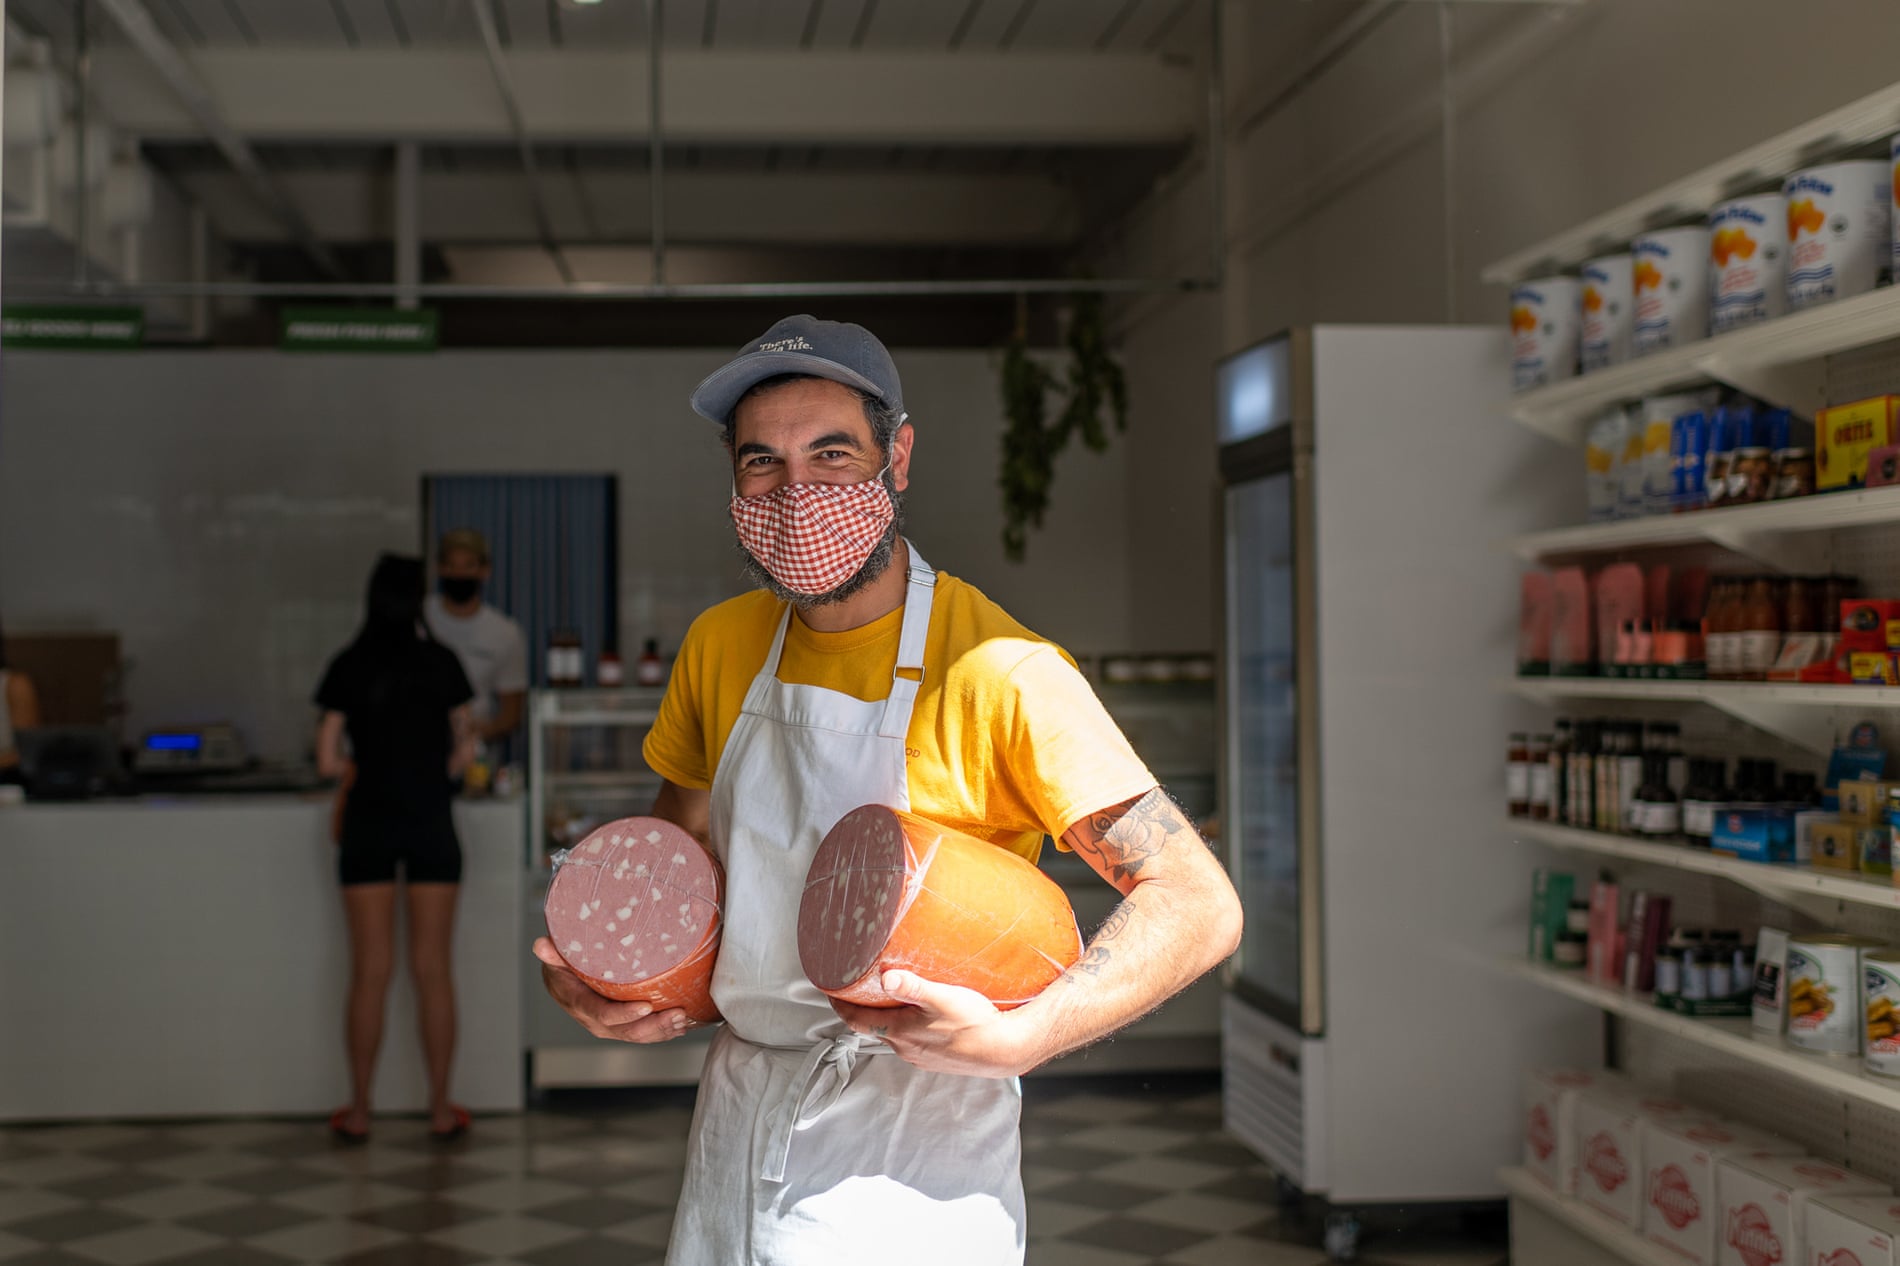 Jake Cassar at his store Mortadeli in Torquay, Victoria holding a large salami under each arm